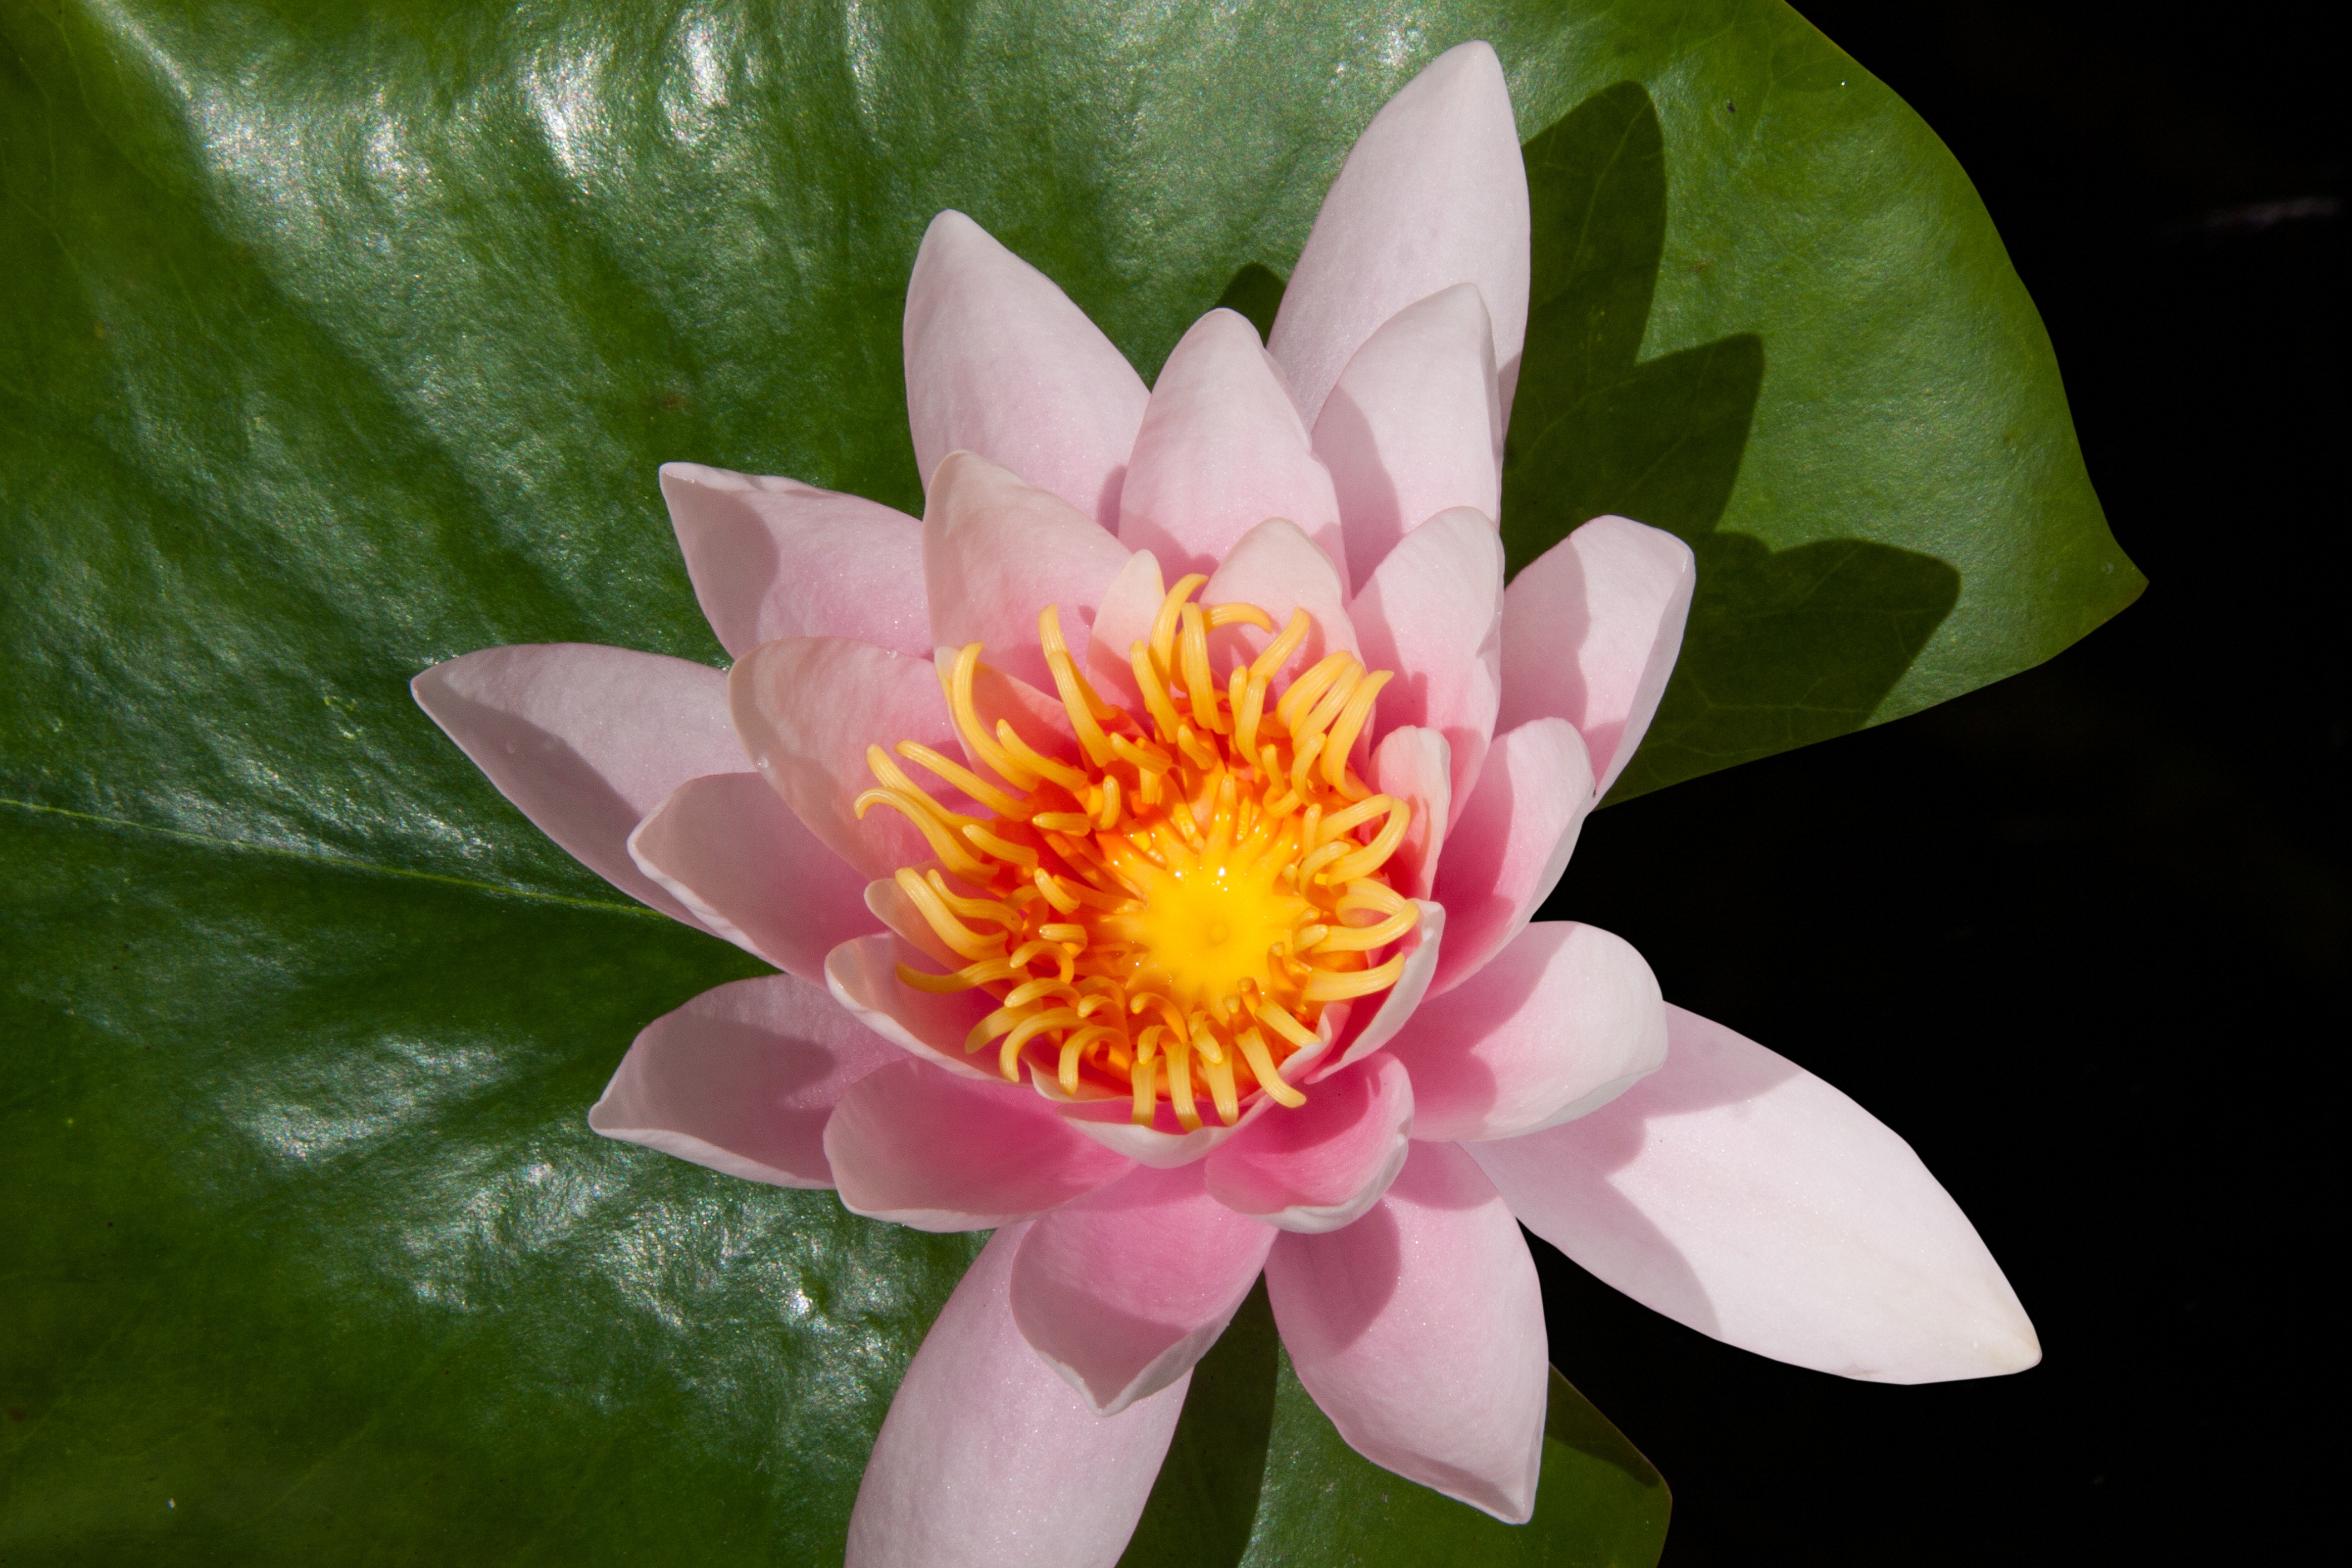 A pink lotus flower on a green leaf